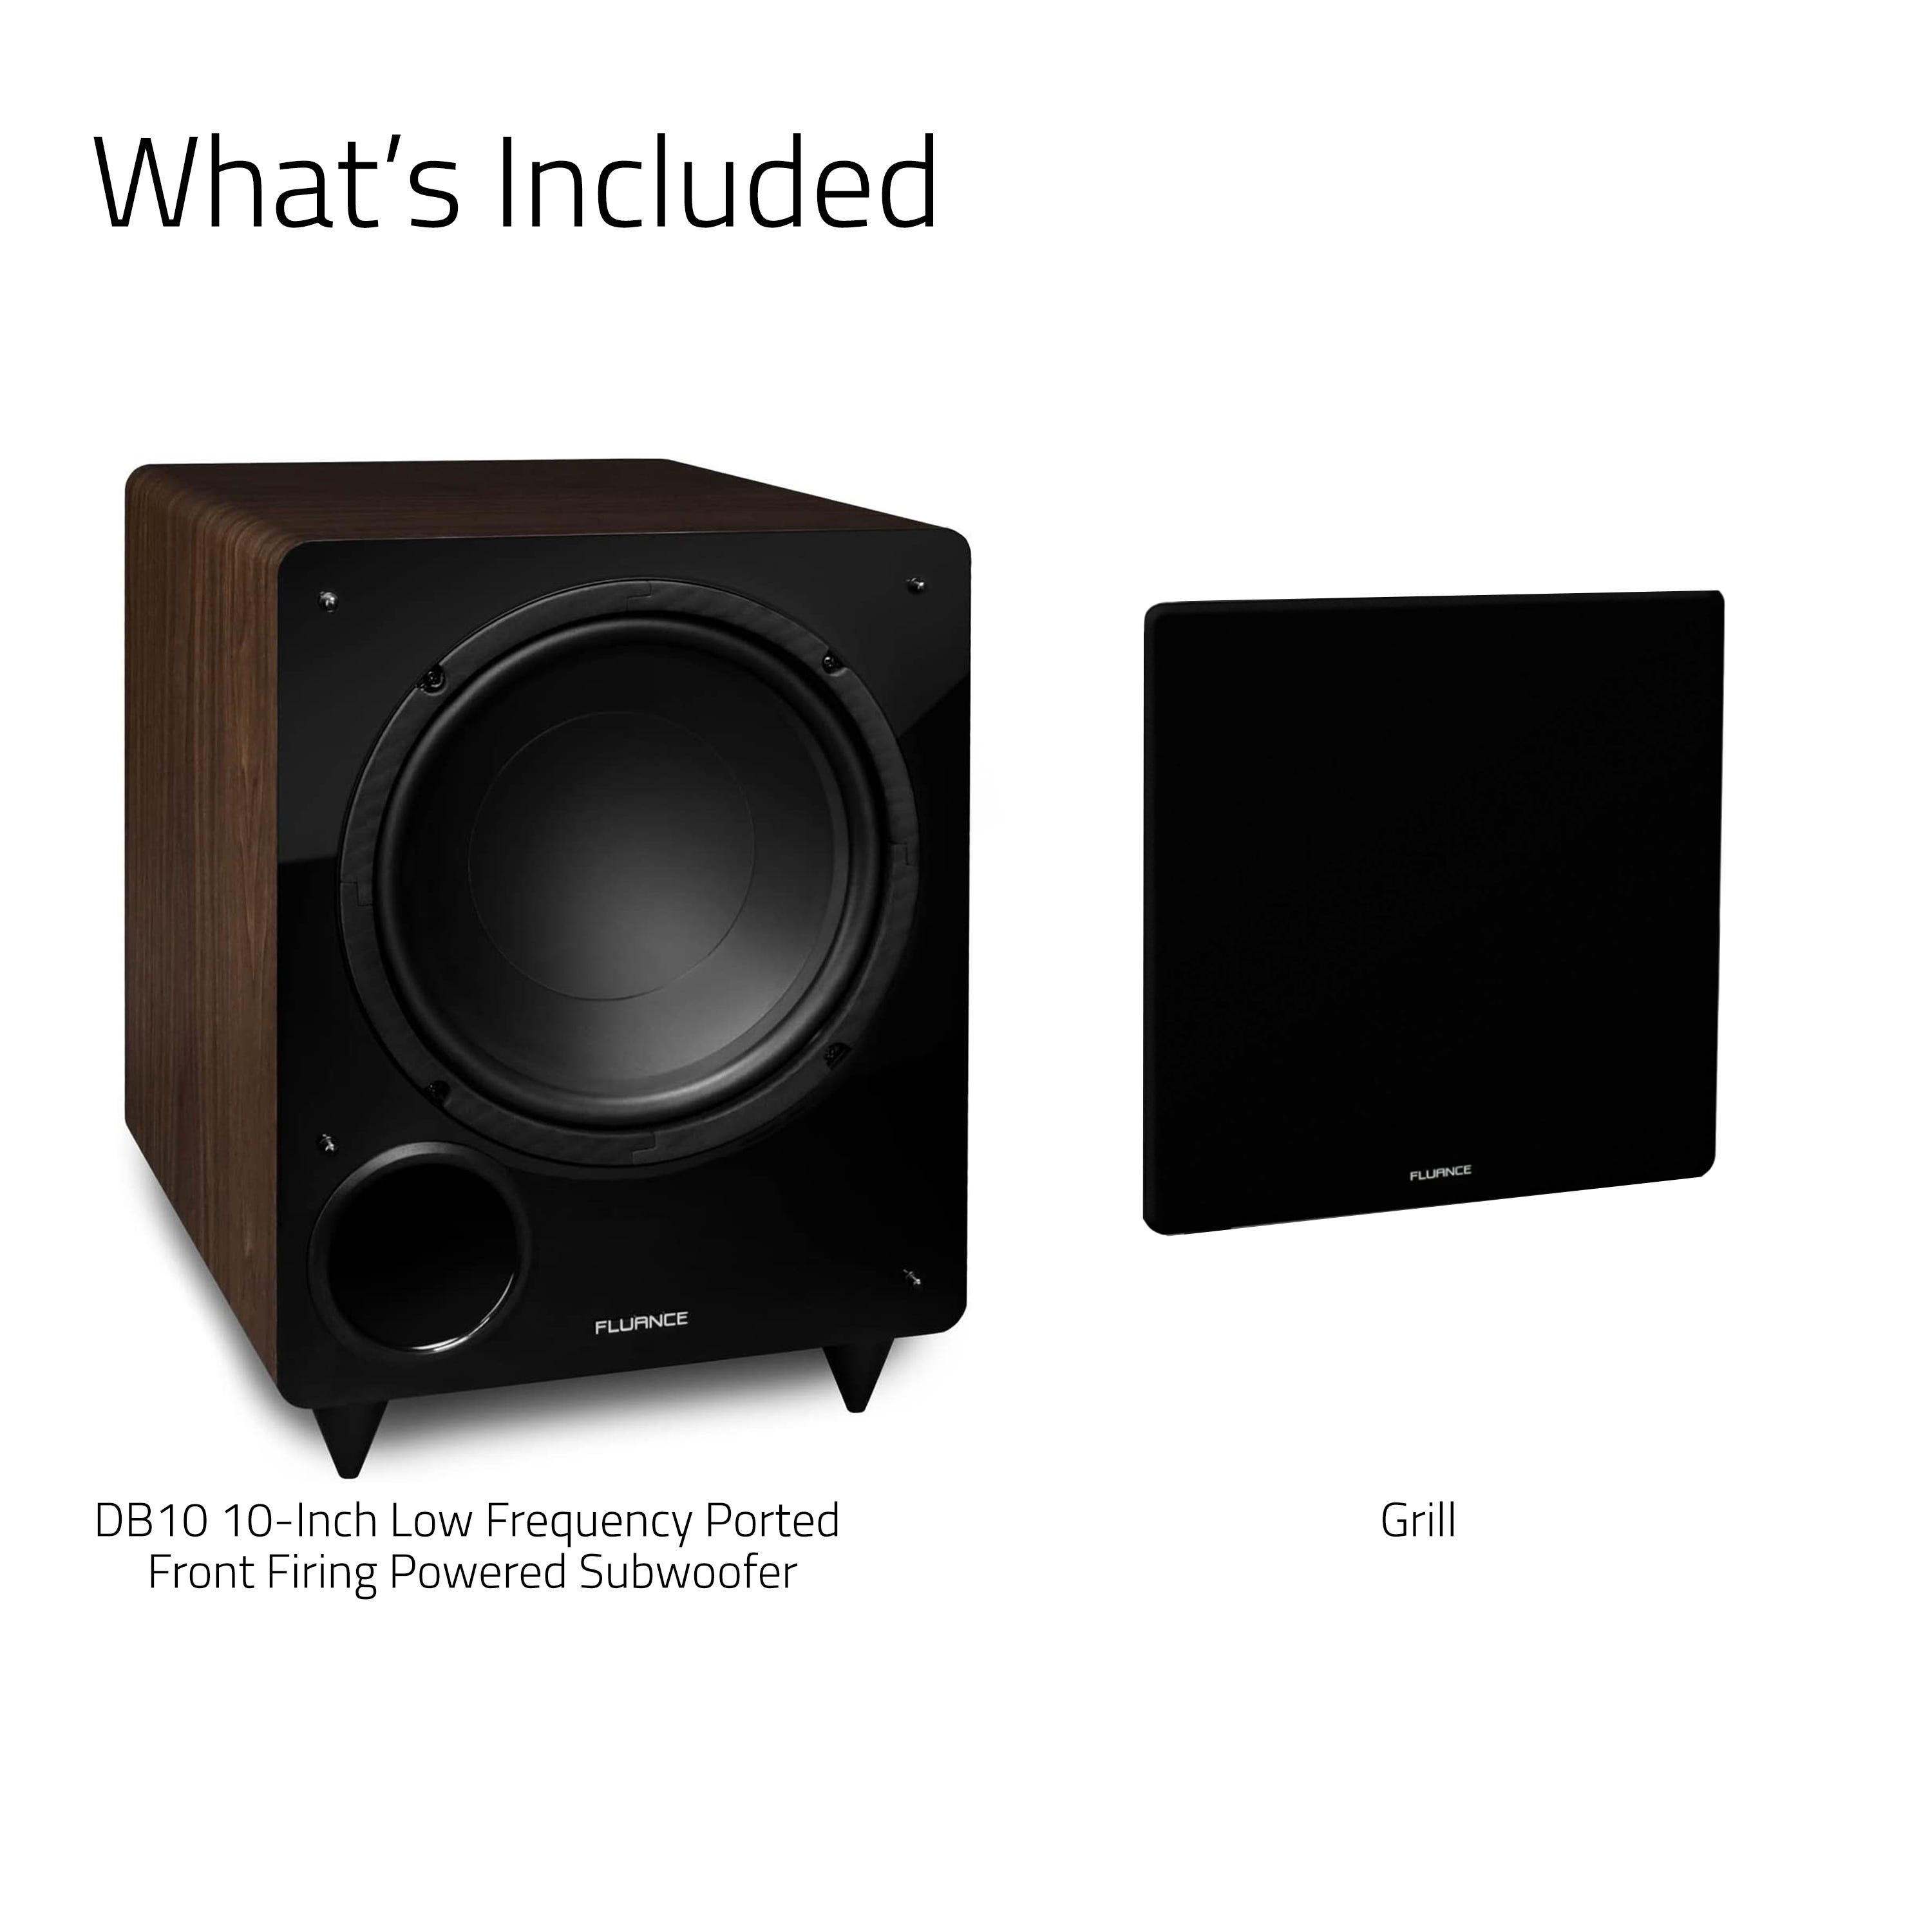 DB10 10-inch Low Frequency Ported Front Firing Powered Subwoofer (Walnut)